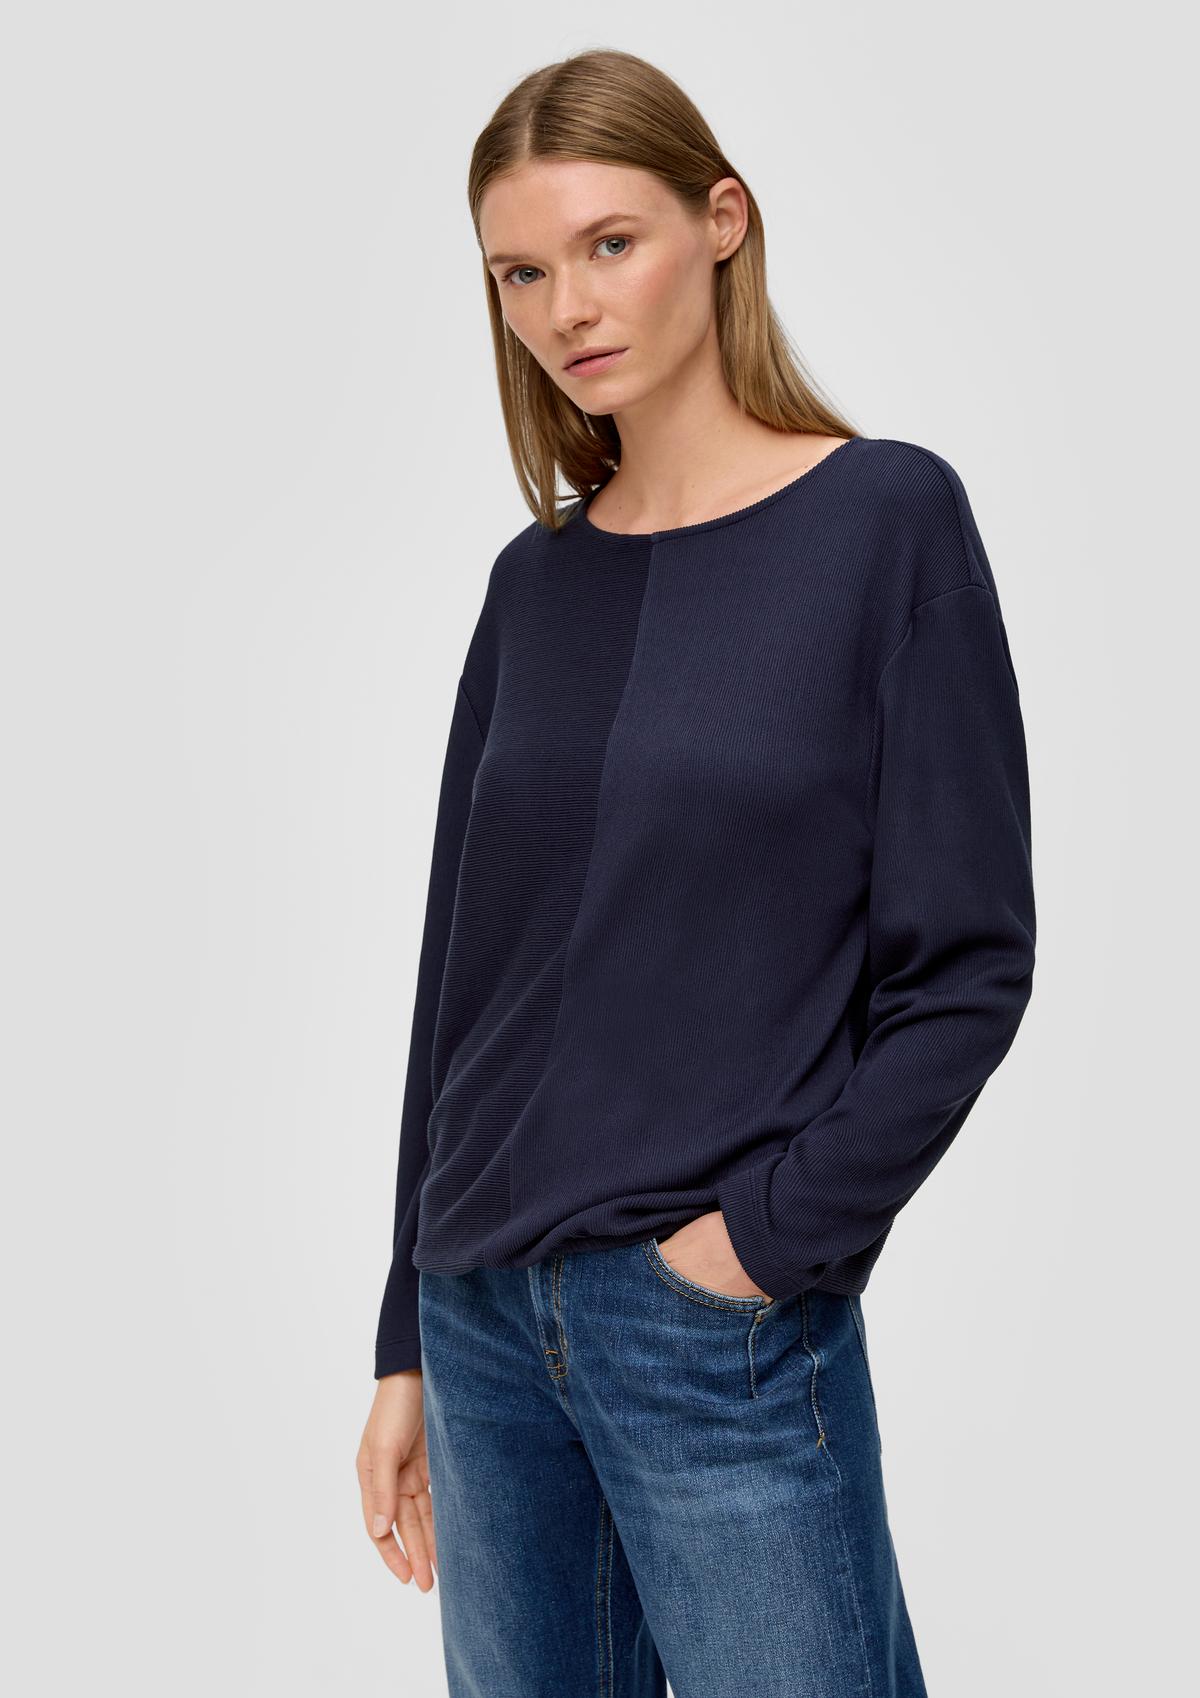 s.Oliver Sweatshirt with a ribbed texture